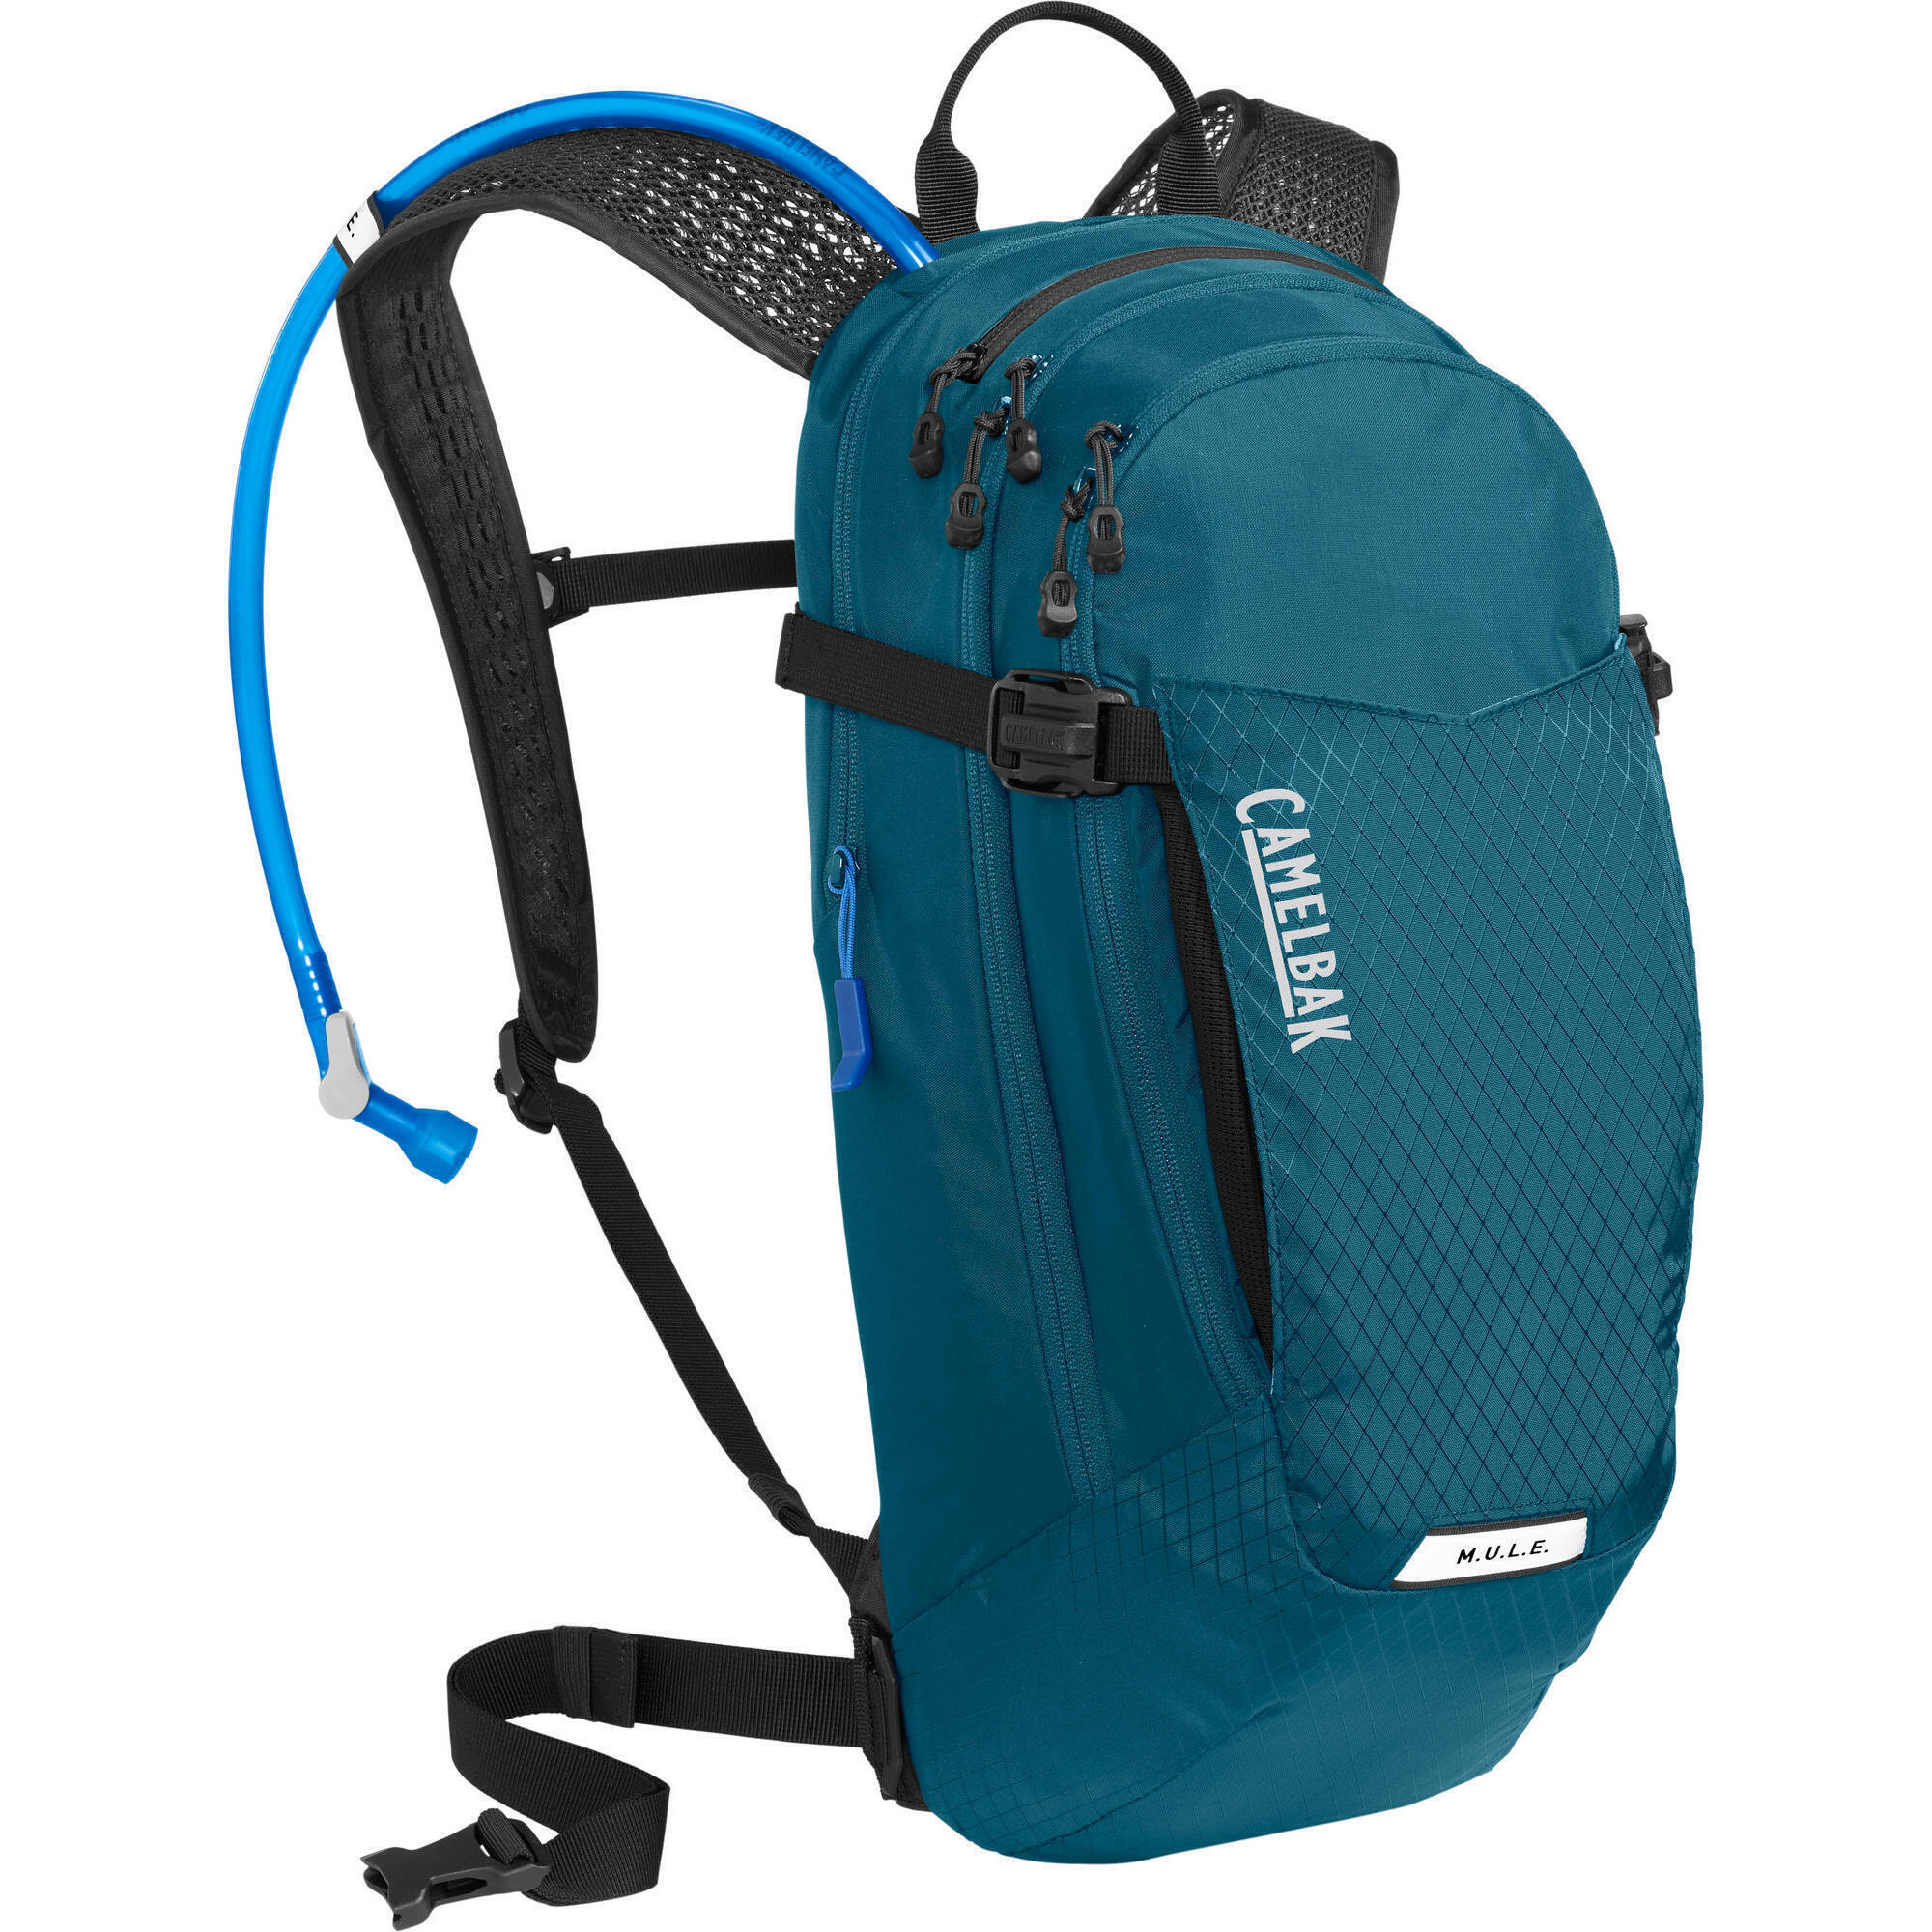 M.U.L.E. Hydration Pack 1with Reservoir 1/7